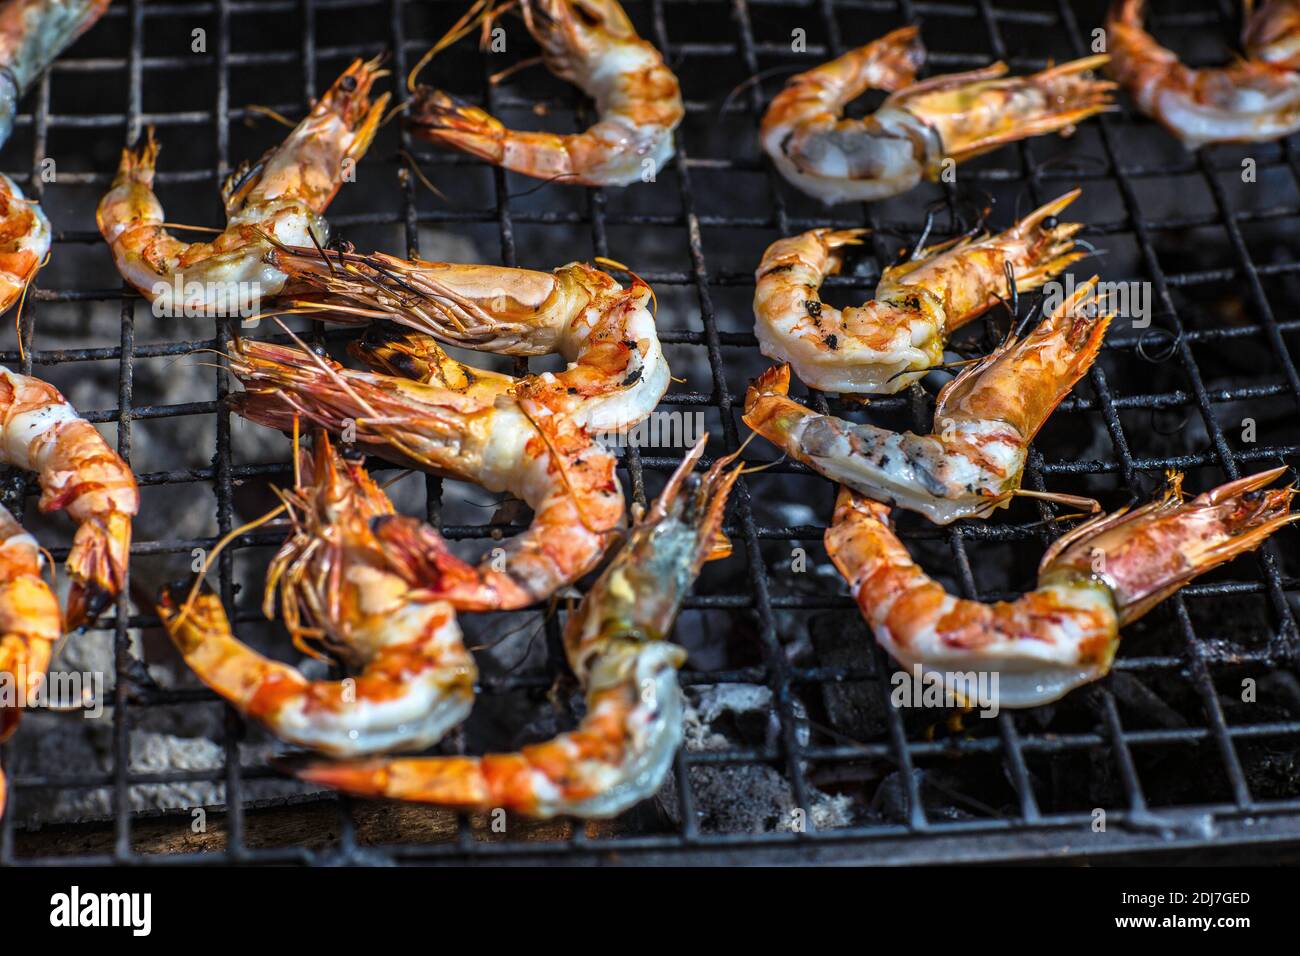 Grilled king size Prawns on grill BBQ Stock Photo